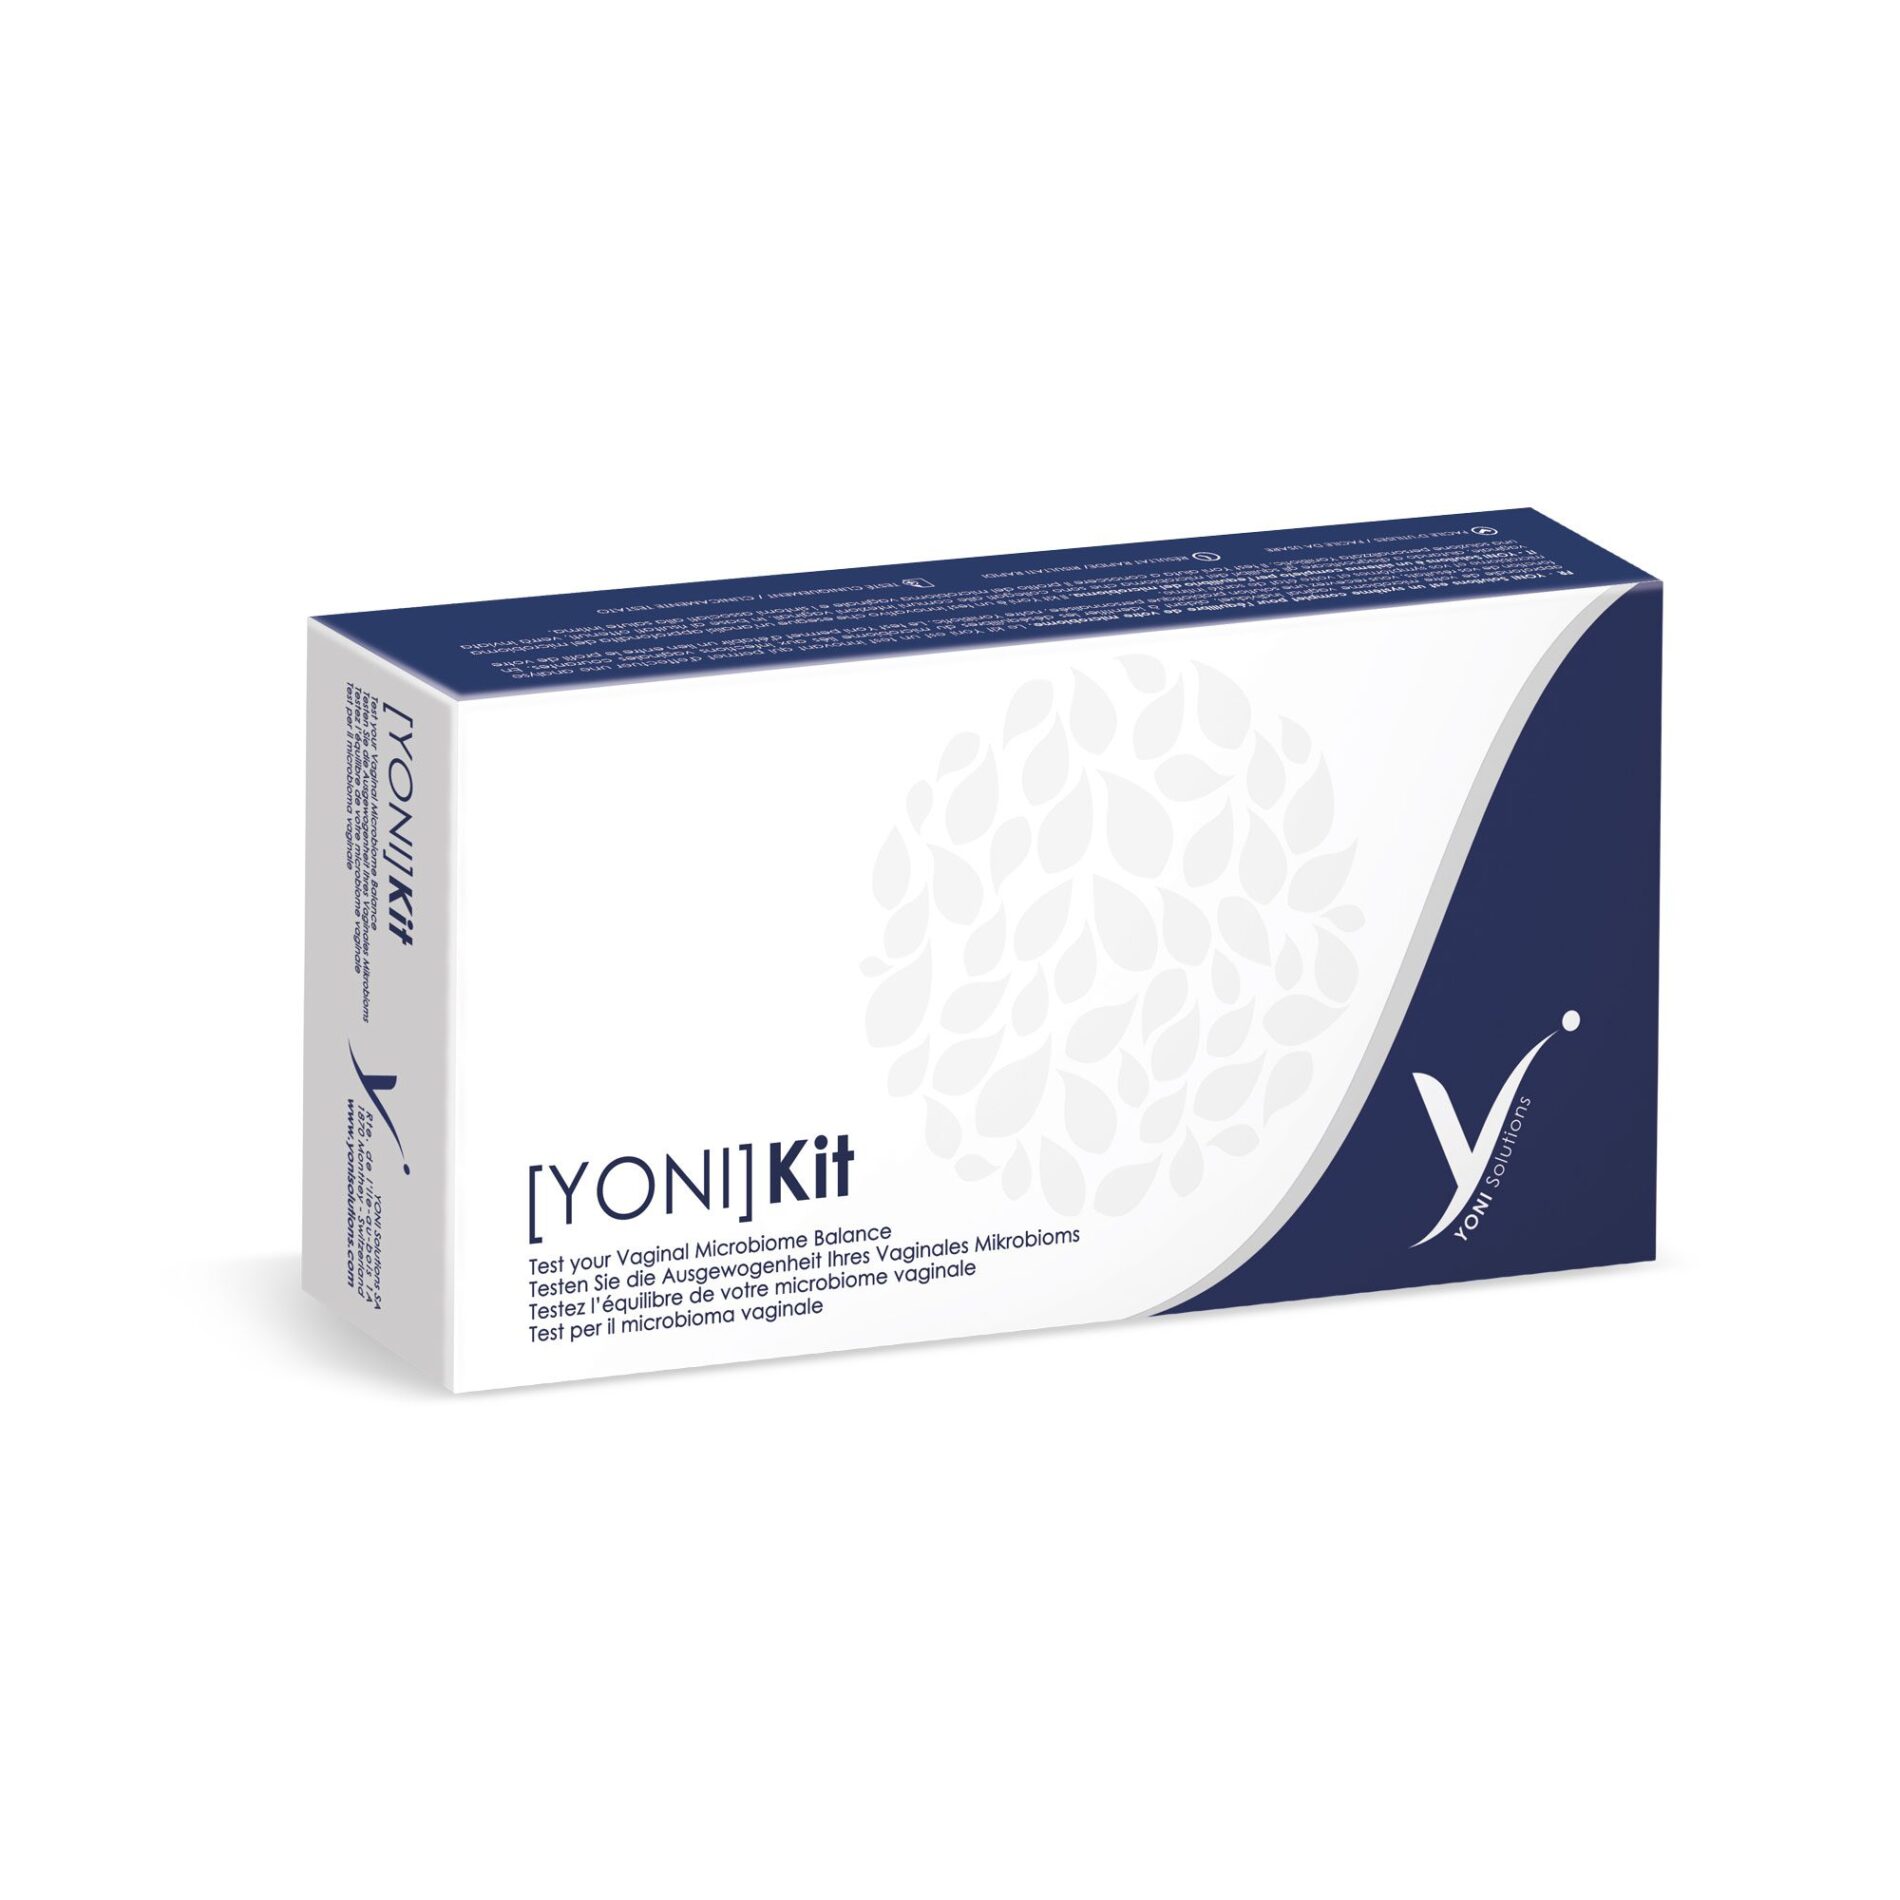 Analyse Your Vaginal Microbiome with the YONI Kit